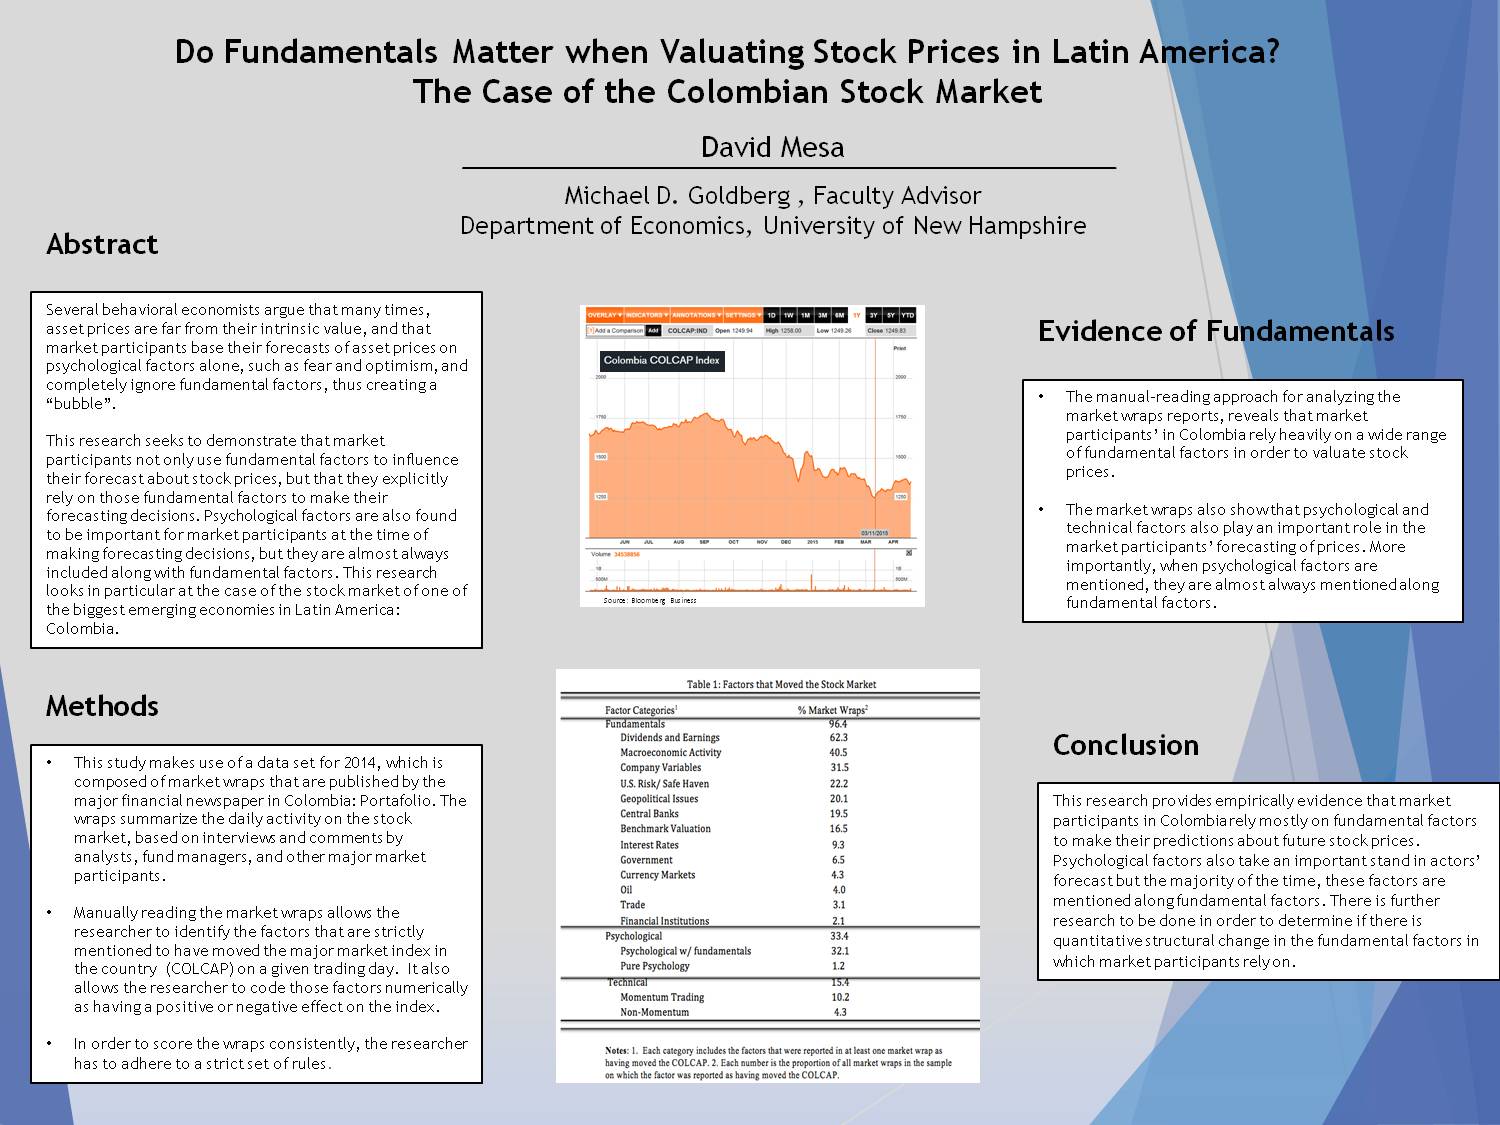 Do Fundamentals Matter When Valuating Stock Prices In Latin America? The Case Of The Colombian Stock Market by doy5